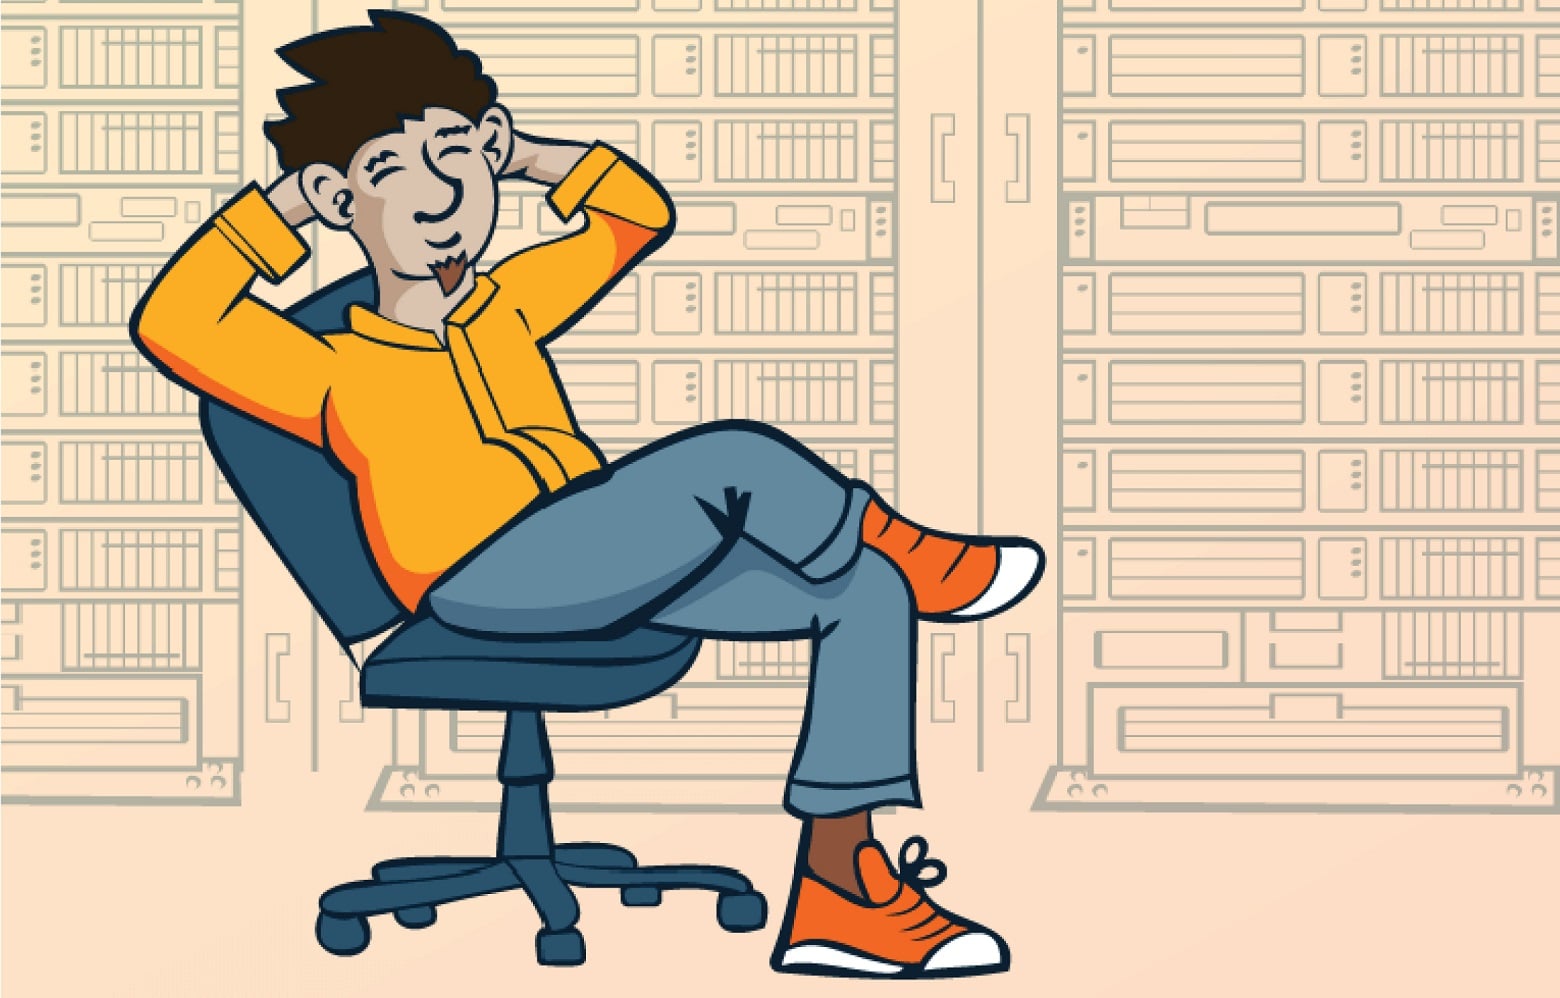 technical-worker-relaxing-on-an-office-chair-illustration